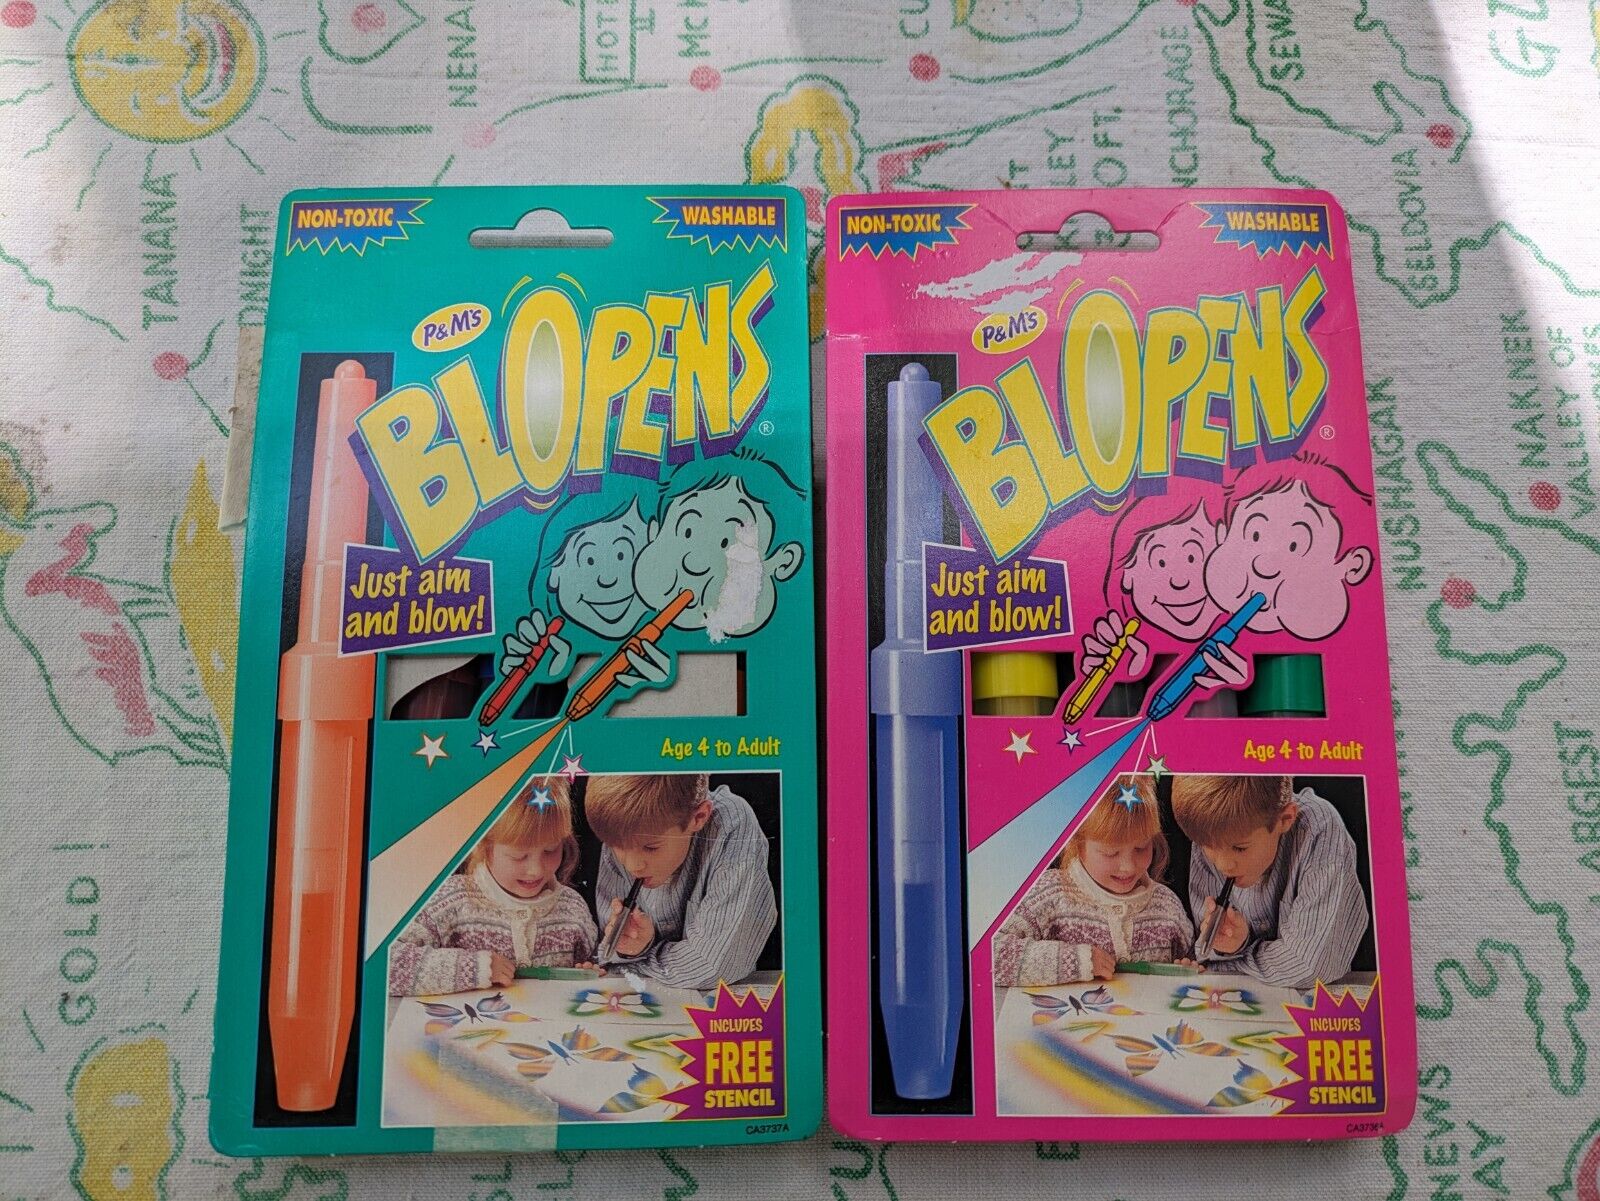 Vintage 90s Blopens Blo Pens P&M Kids Markers Brand New in Box 1996